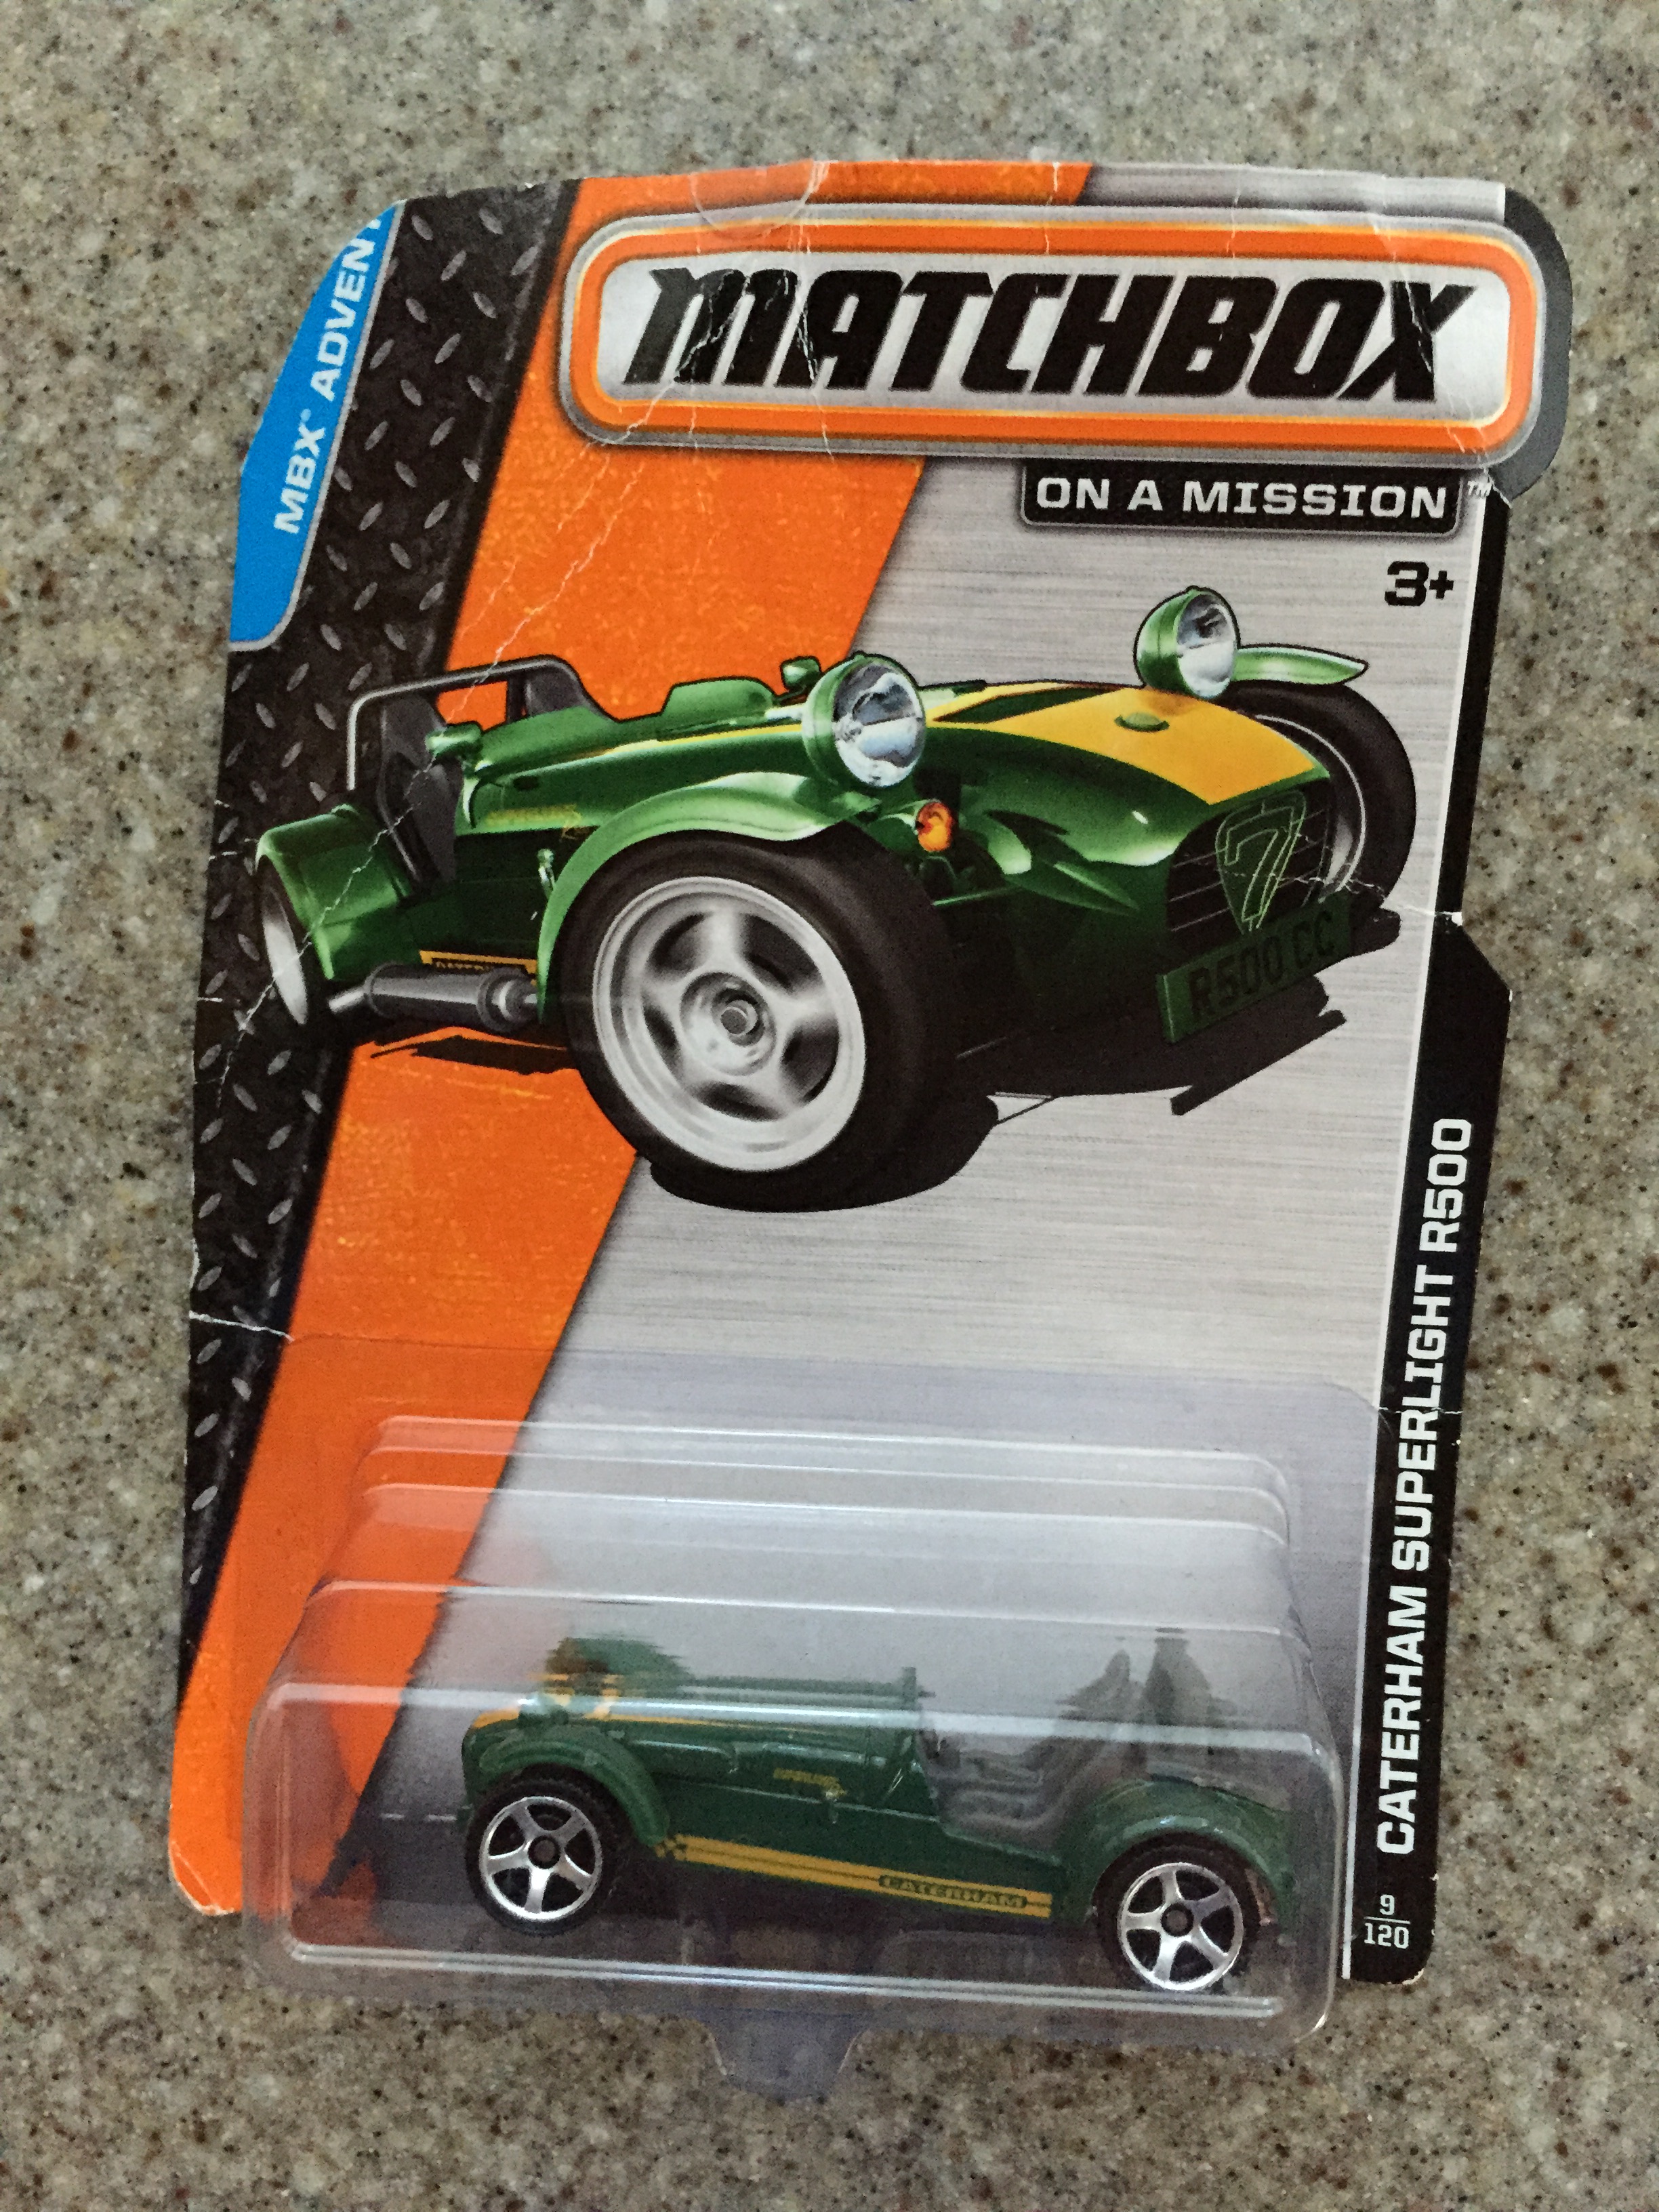 Another green Caterham